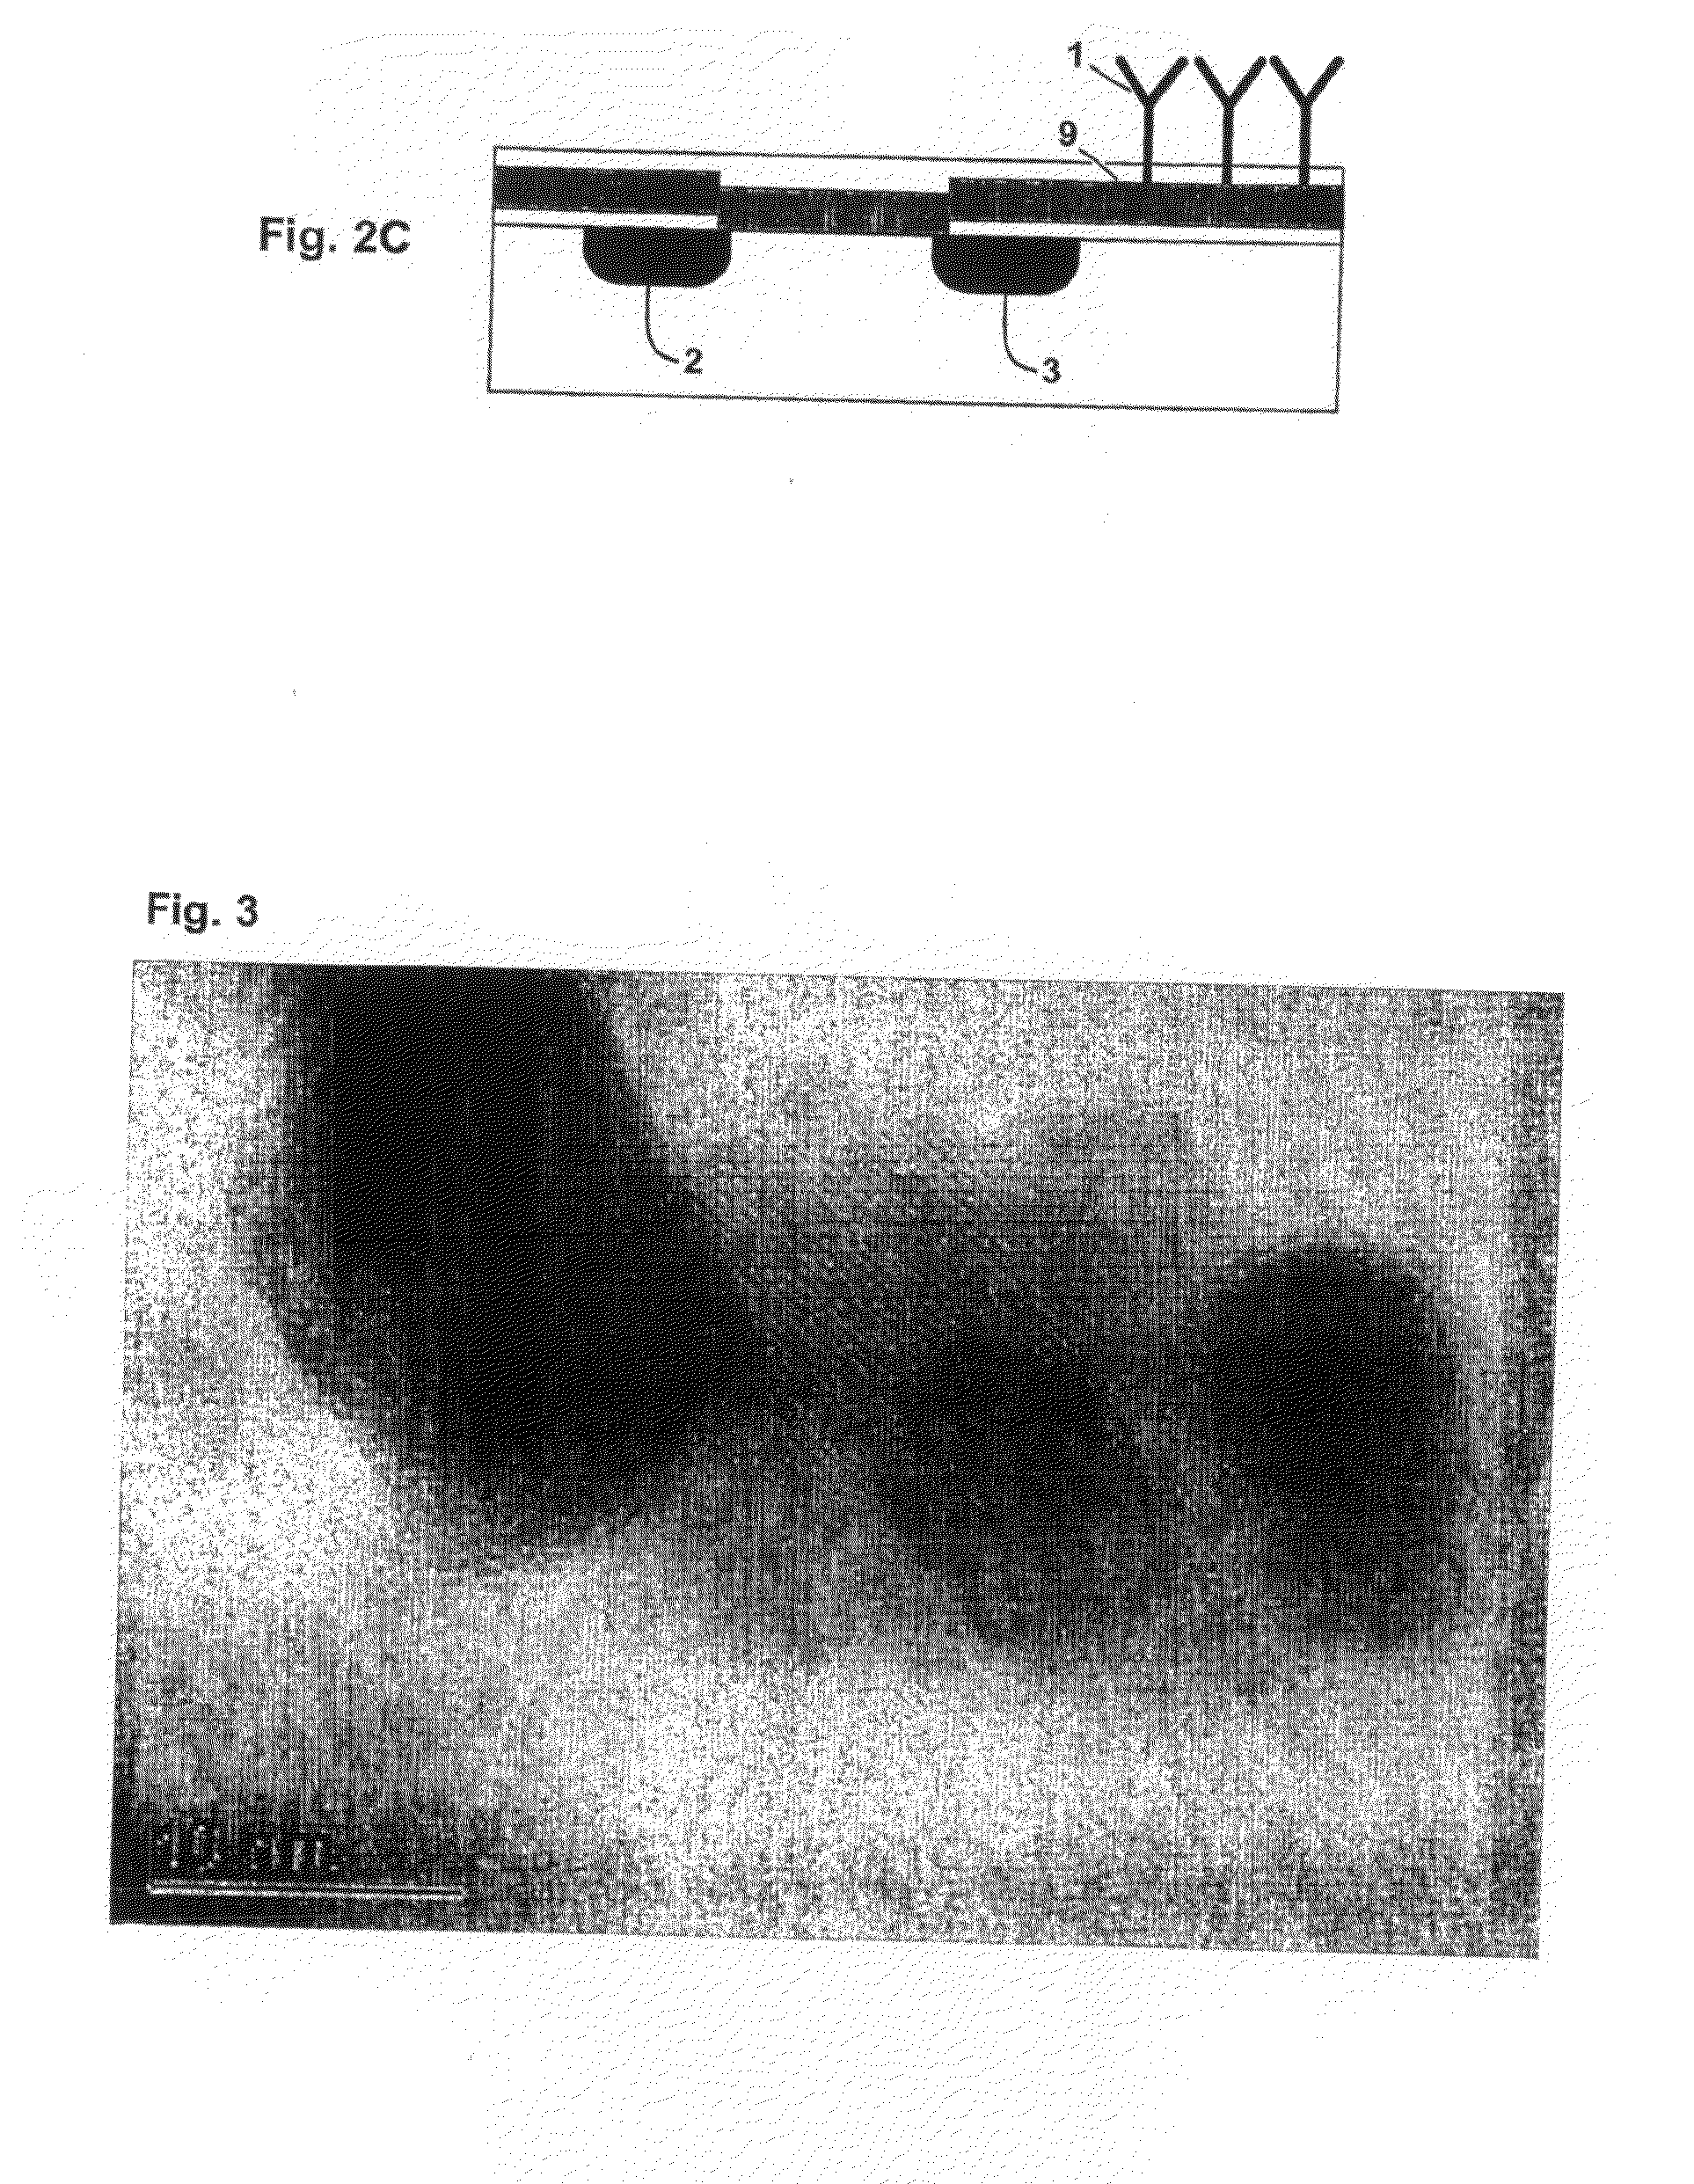 Method of electrically detecting a biological analyte molecule